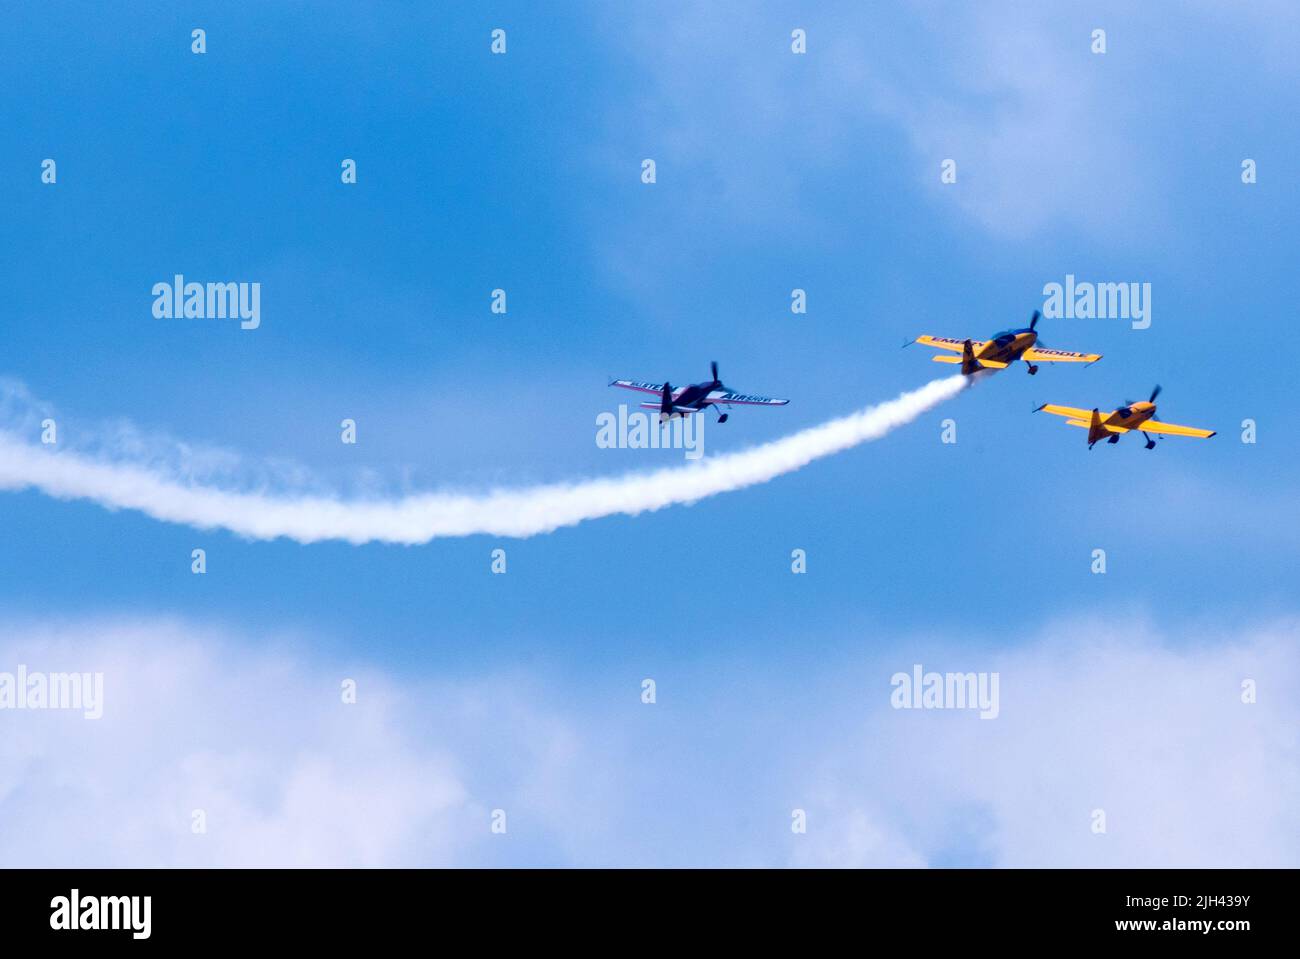 July 11 2019 Battle creek Michigan USA; planes fly in formation at an air stunt show in Michigan Stock Photo